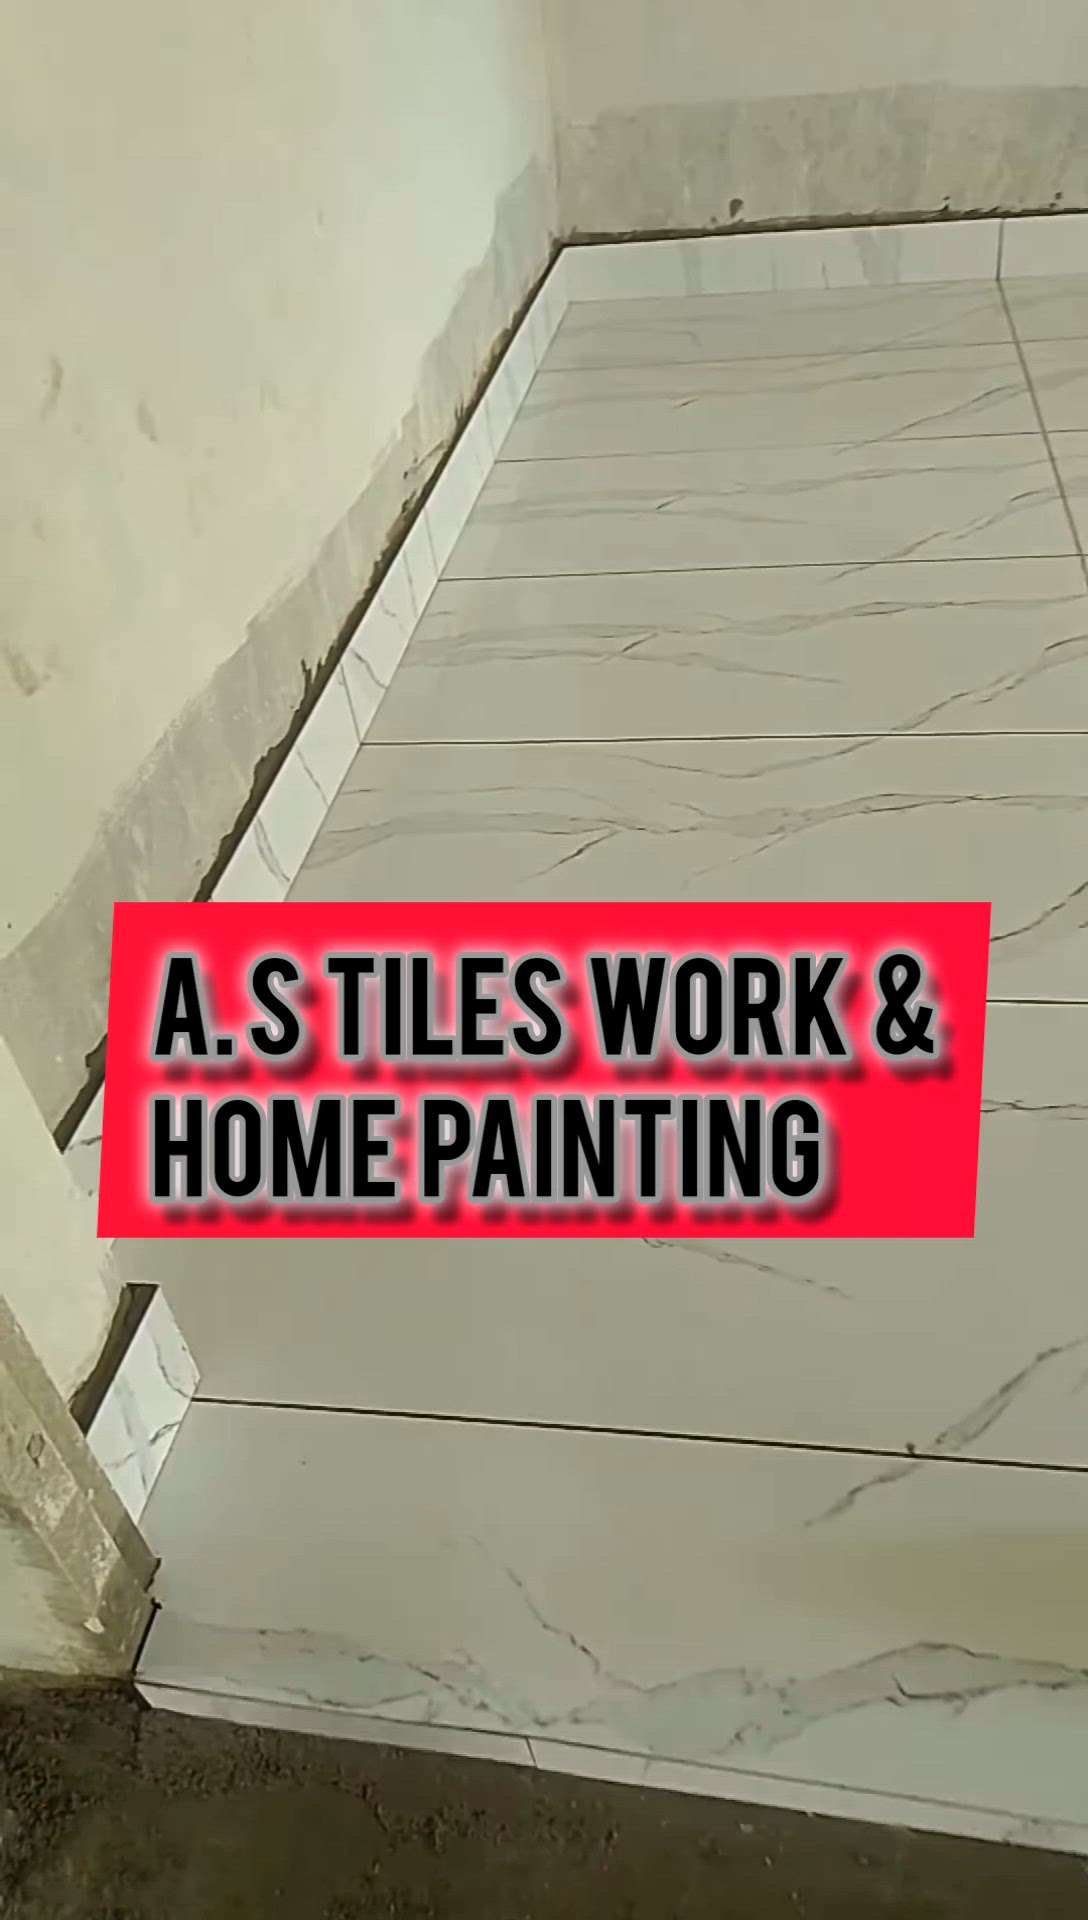 A.S TIles Work & Home painting